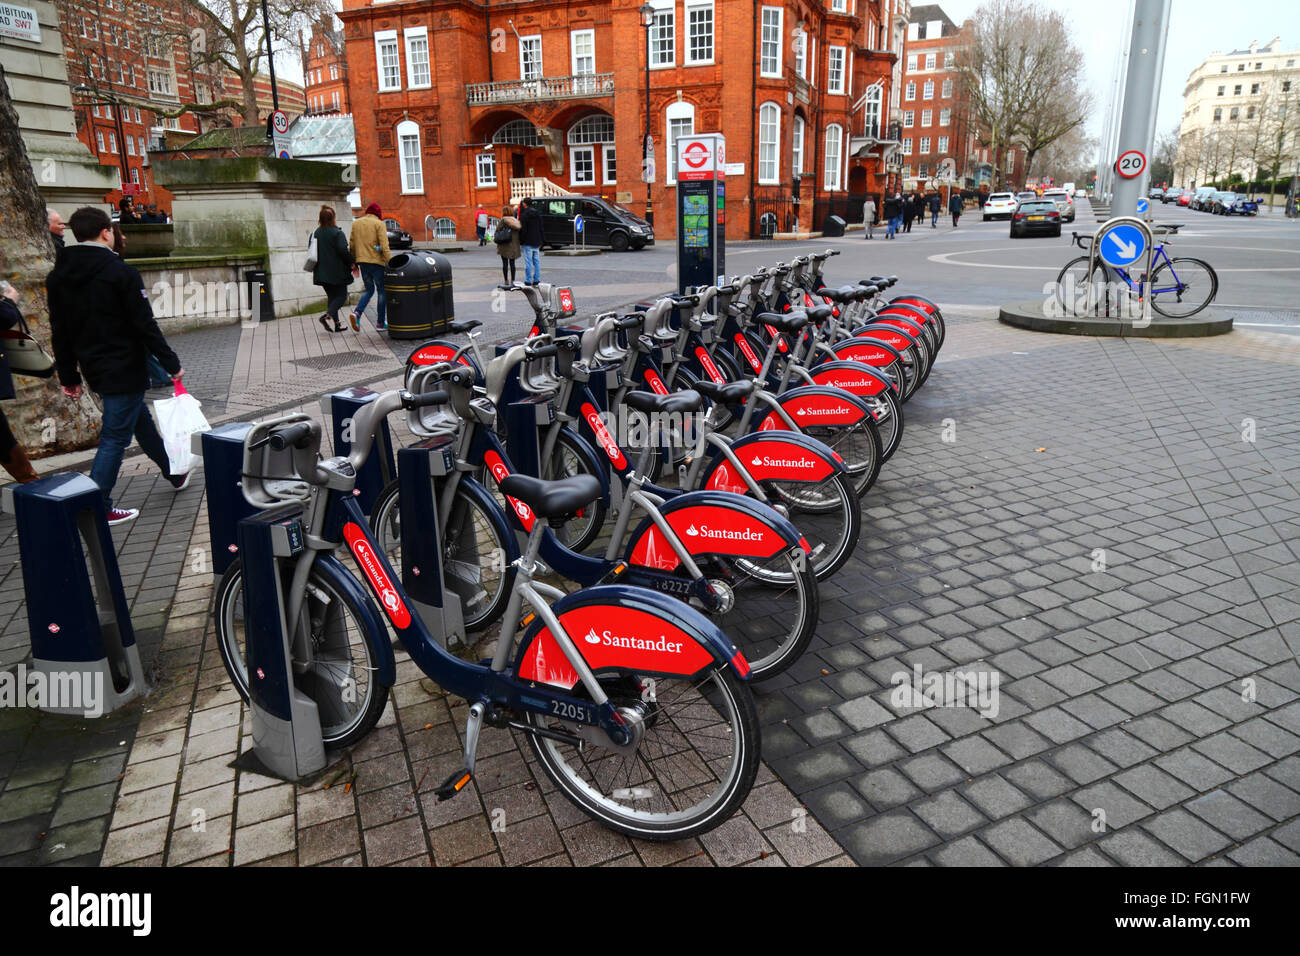 Santander Cycles hire bicycles at a docking station in Exhibition Road, Kensington, London, England Stock Photo